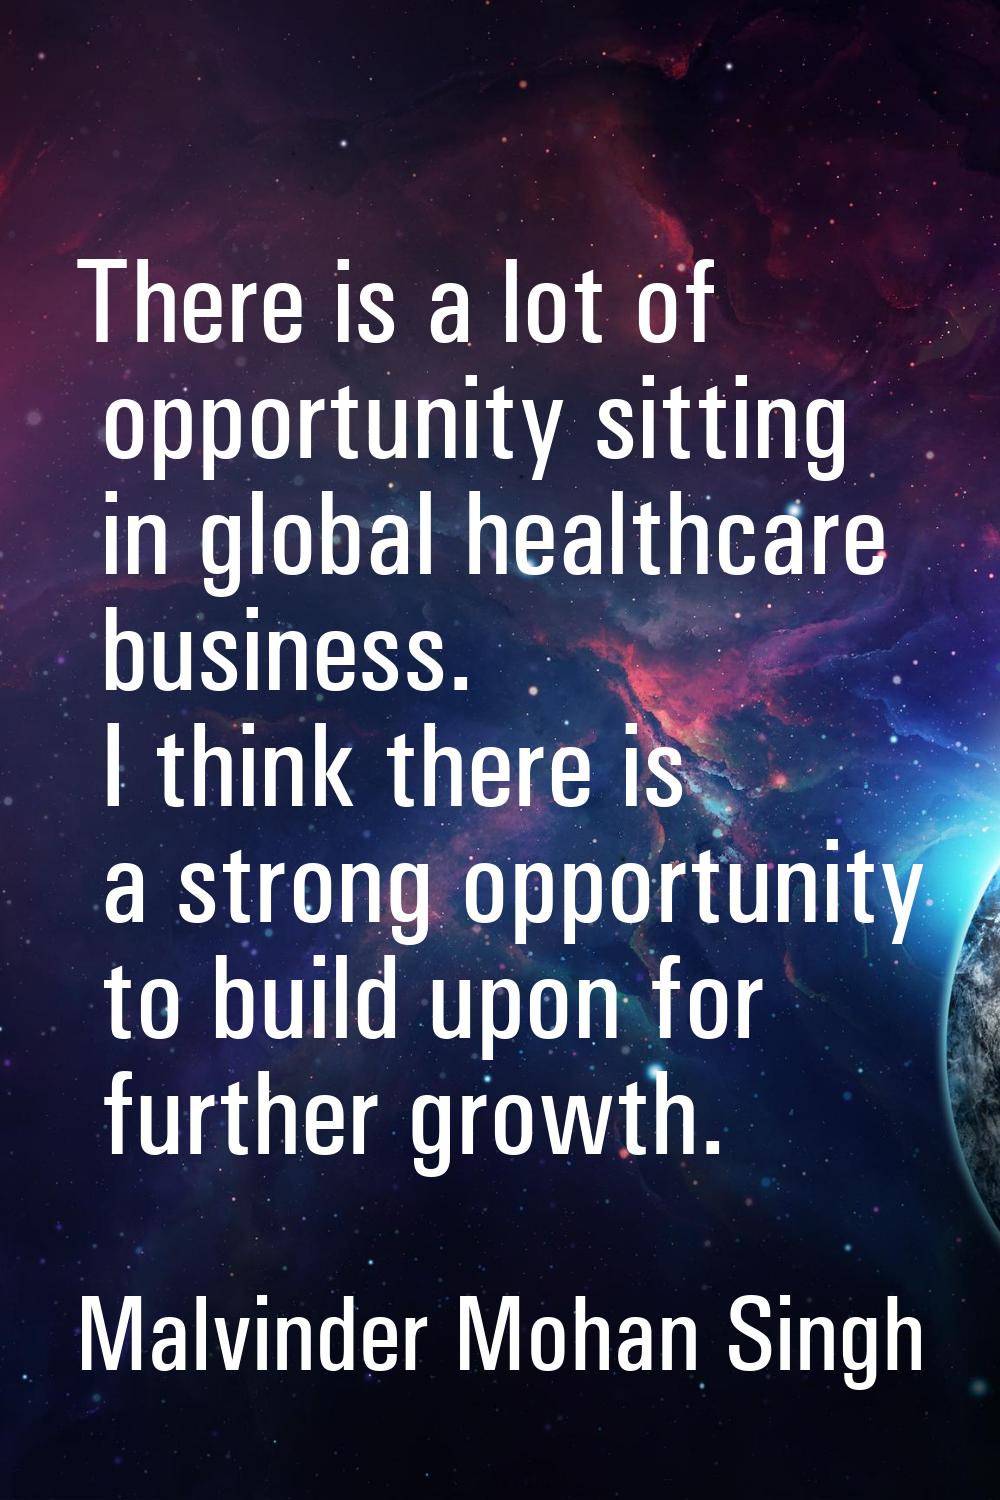 There is a lot of opportunity sitting in global healthcare business. I think there is a strong oppo